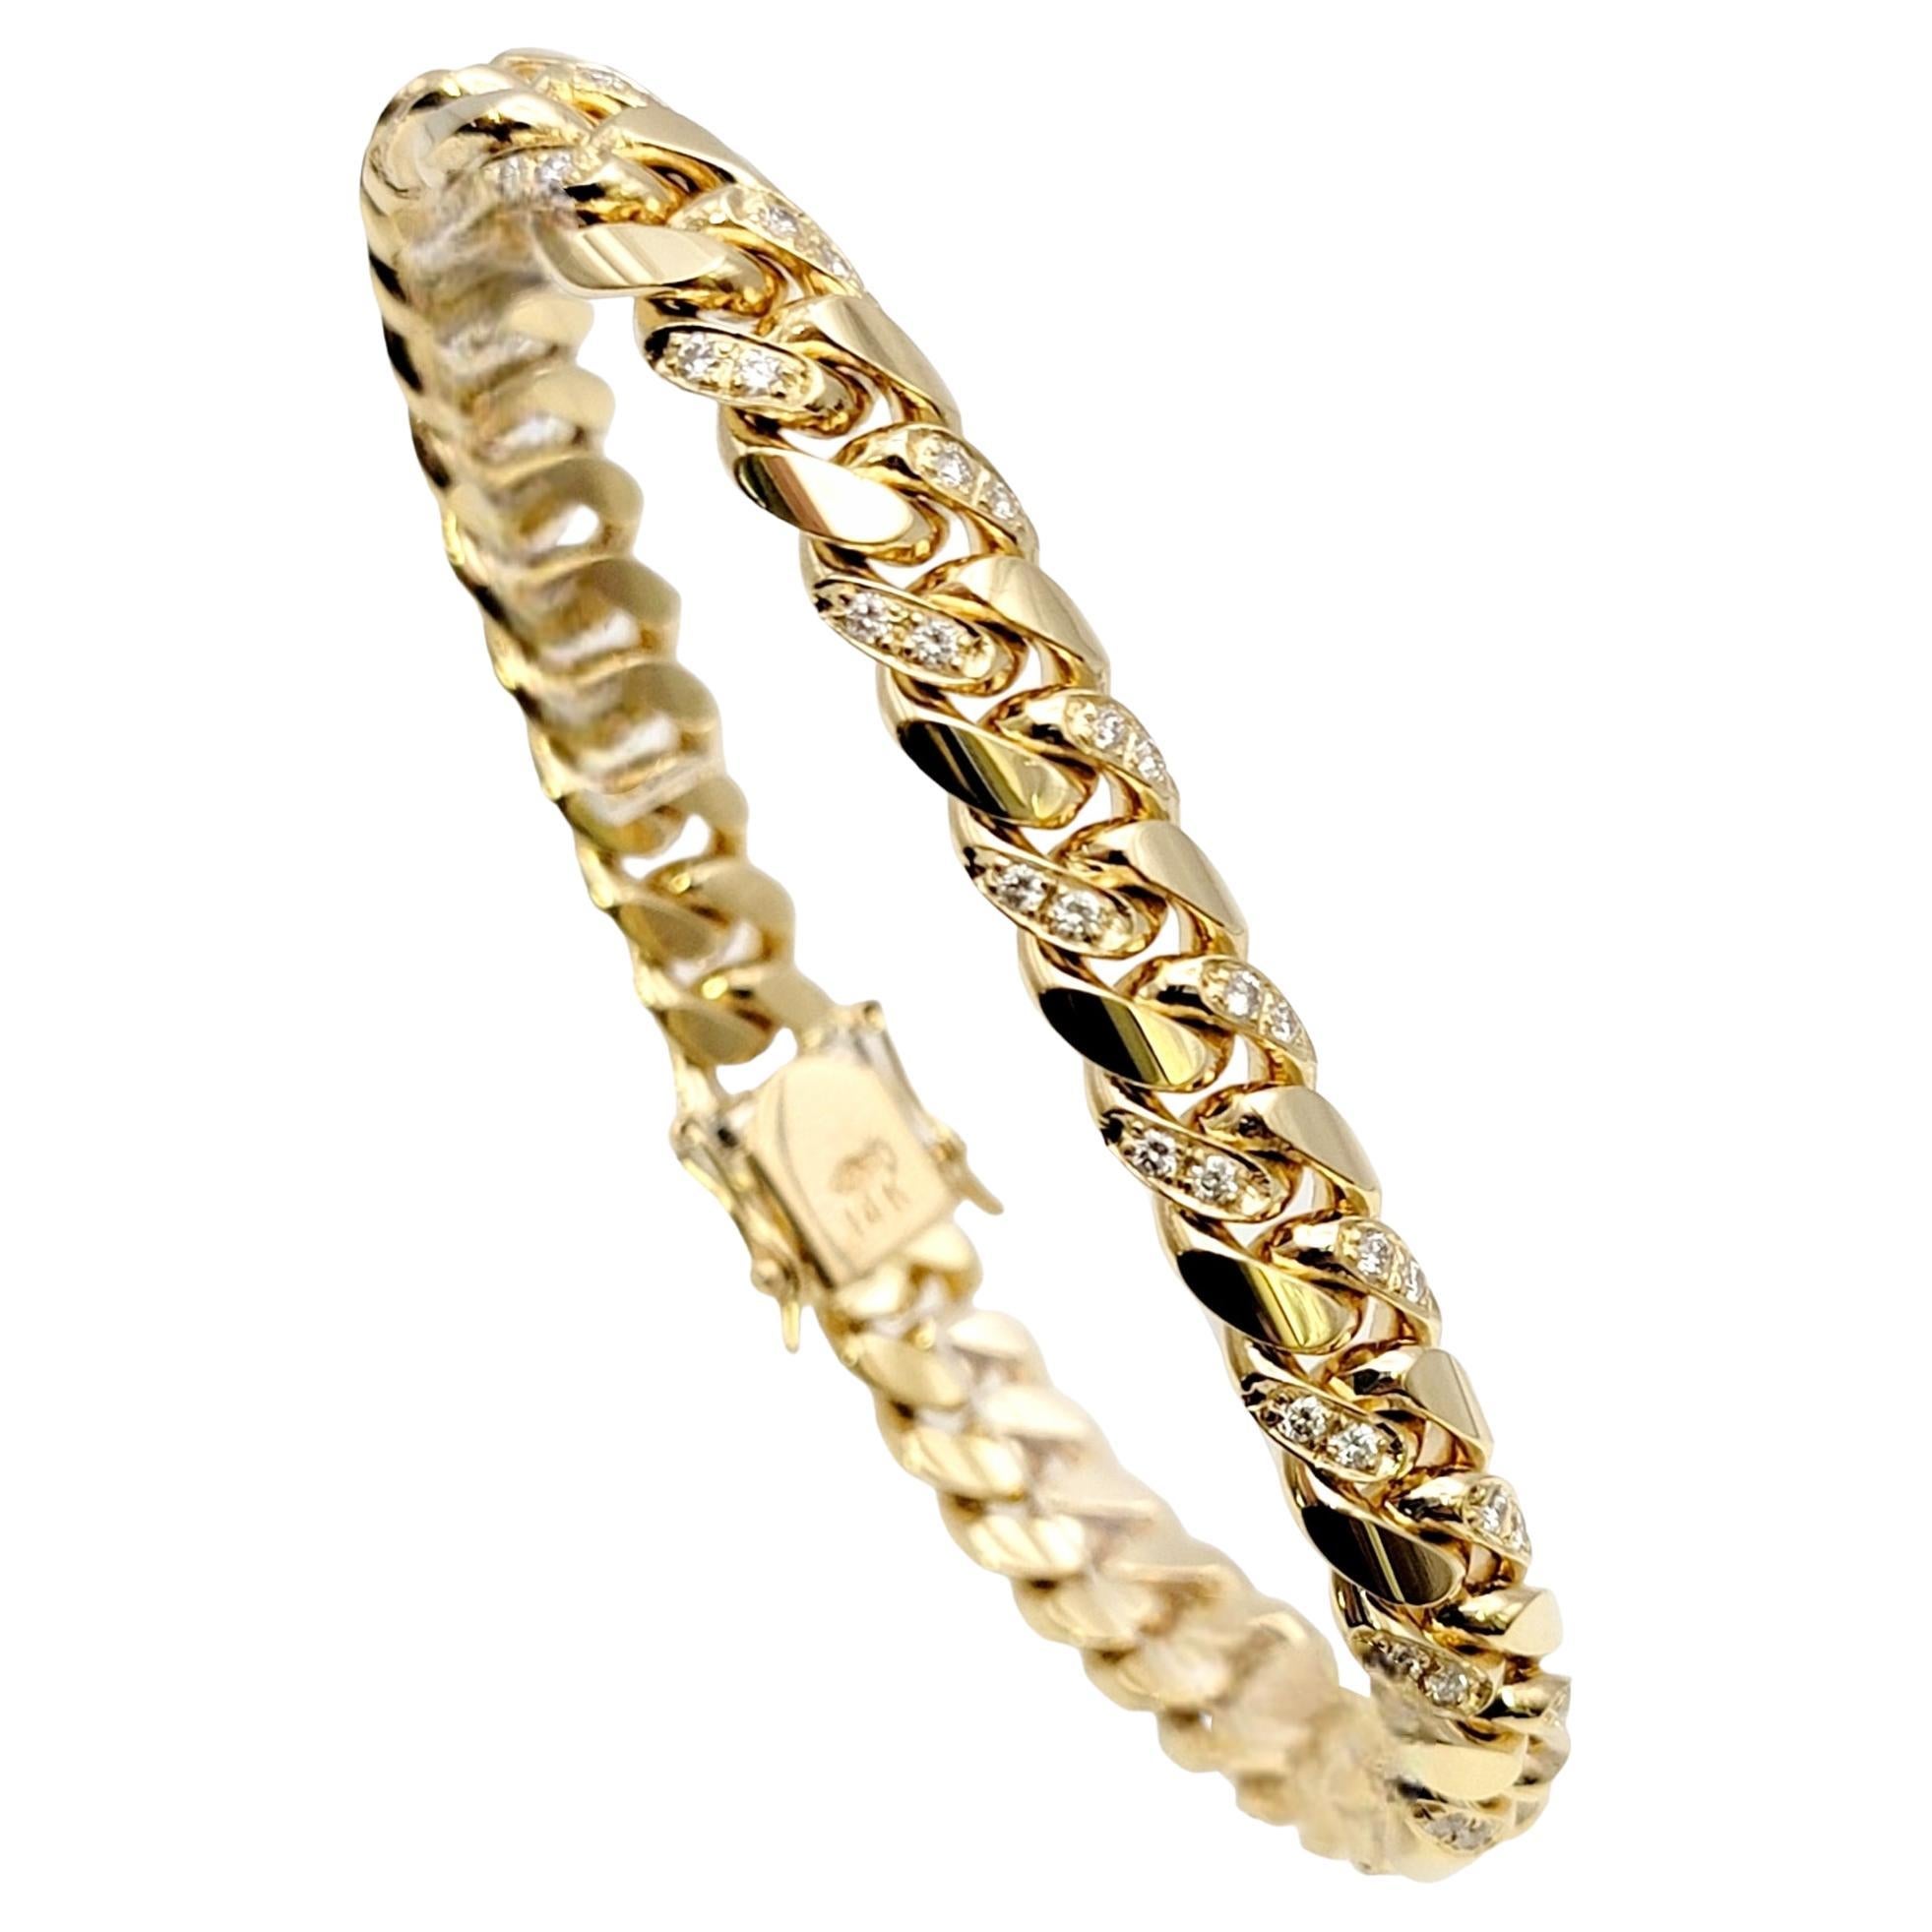 Unisex 14 Karat Yellow Gold Curb Link Bracelet with Pave Diamond Accents For Sale